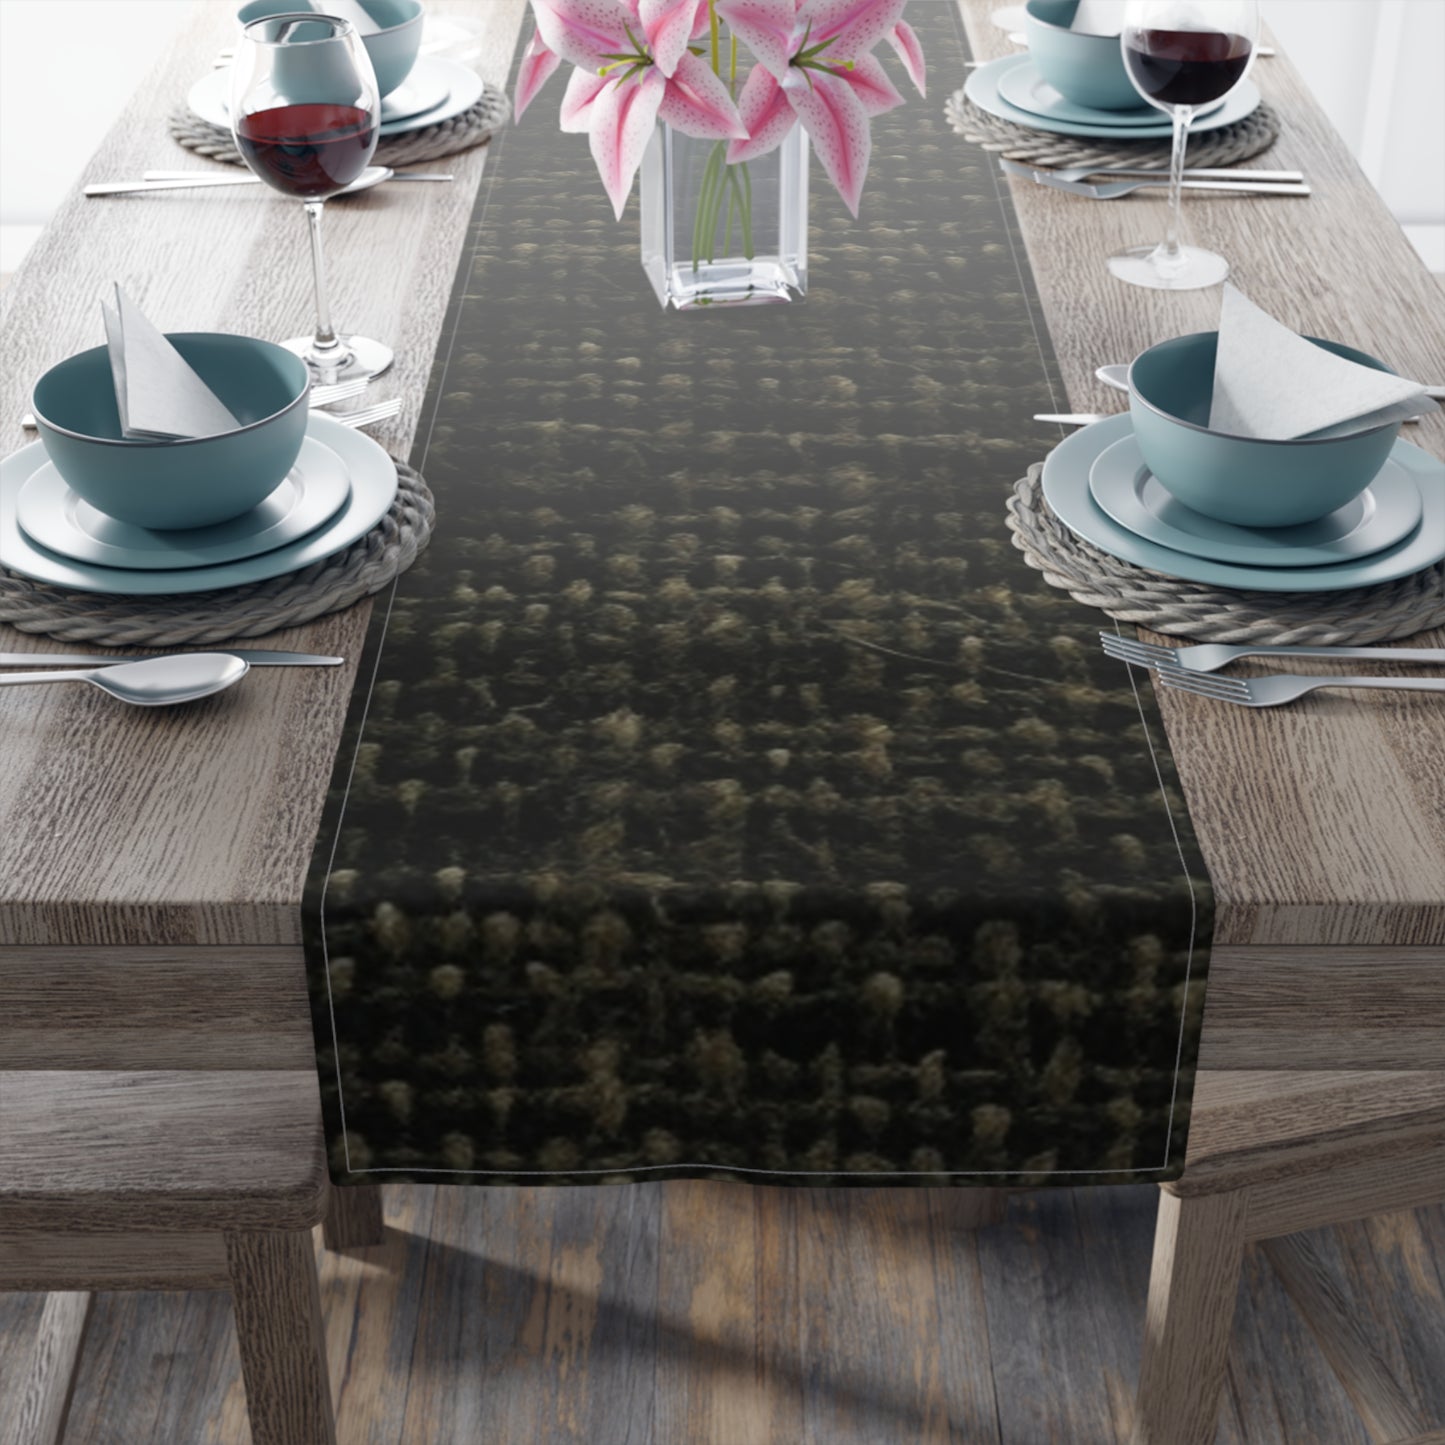 Sophisticated Seamless Texture - Black Denim-Inspired Fabric - Table Runner (Cotton, Poly)